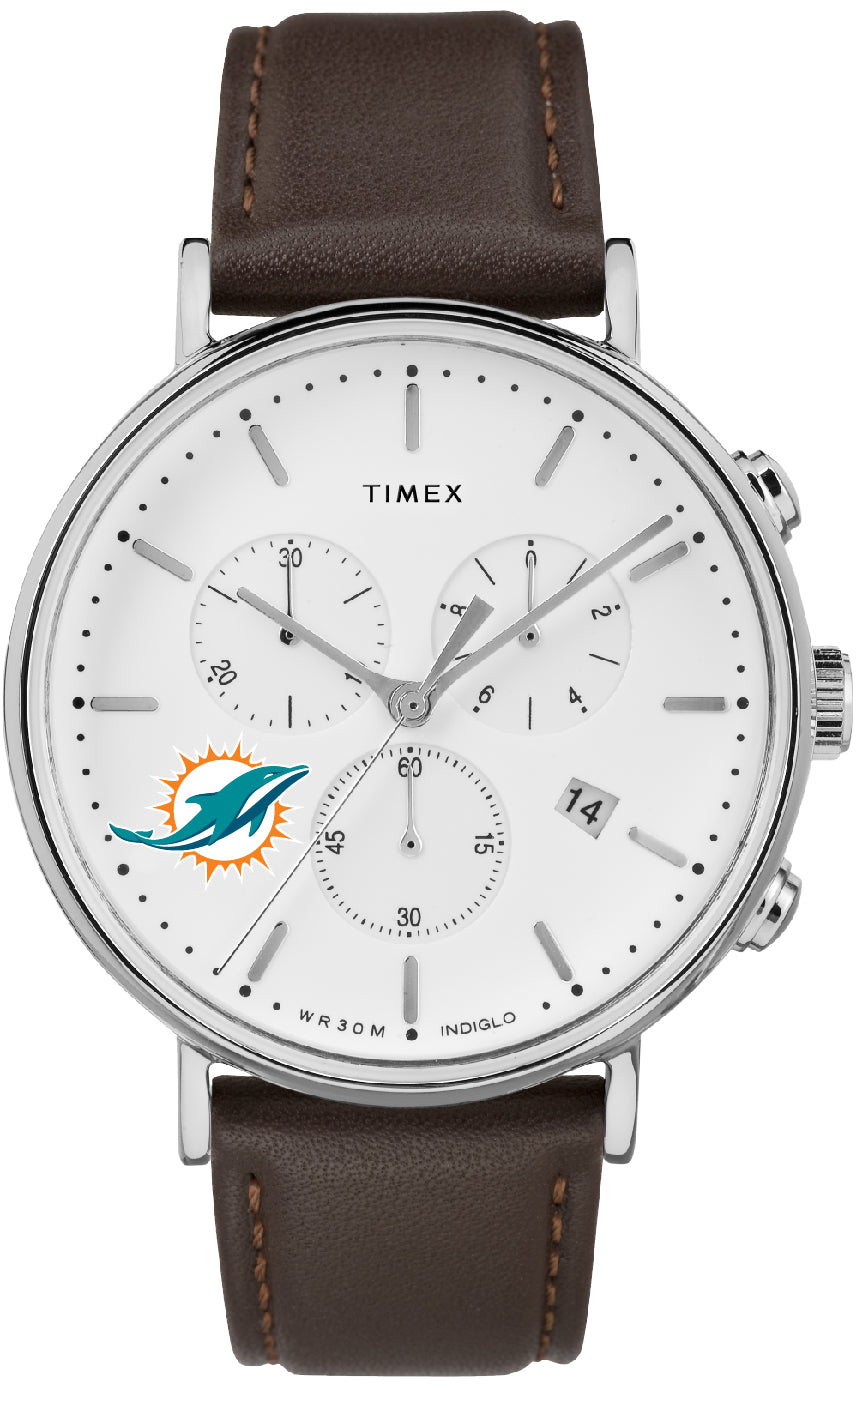 Miami Dolphins General Manager Men's Timex Watch